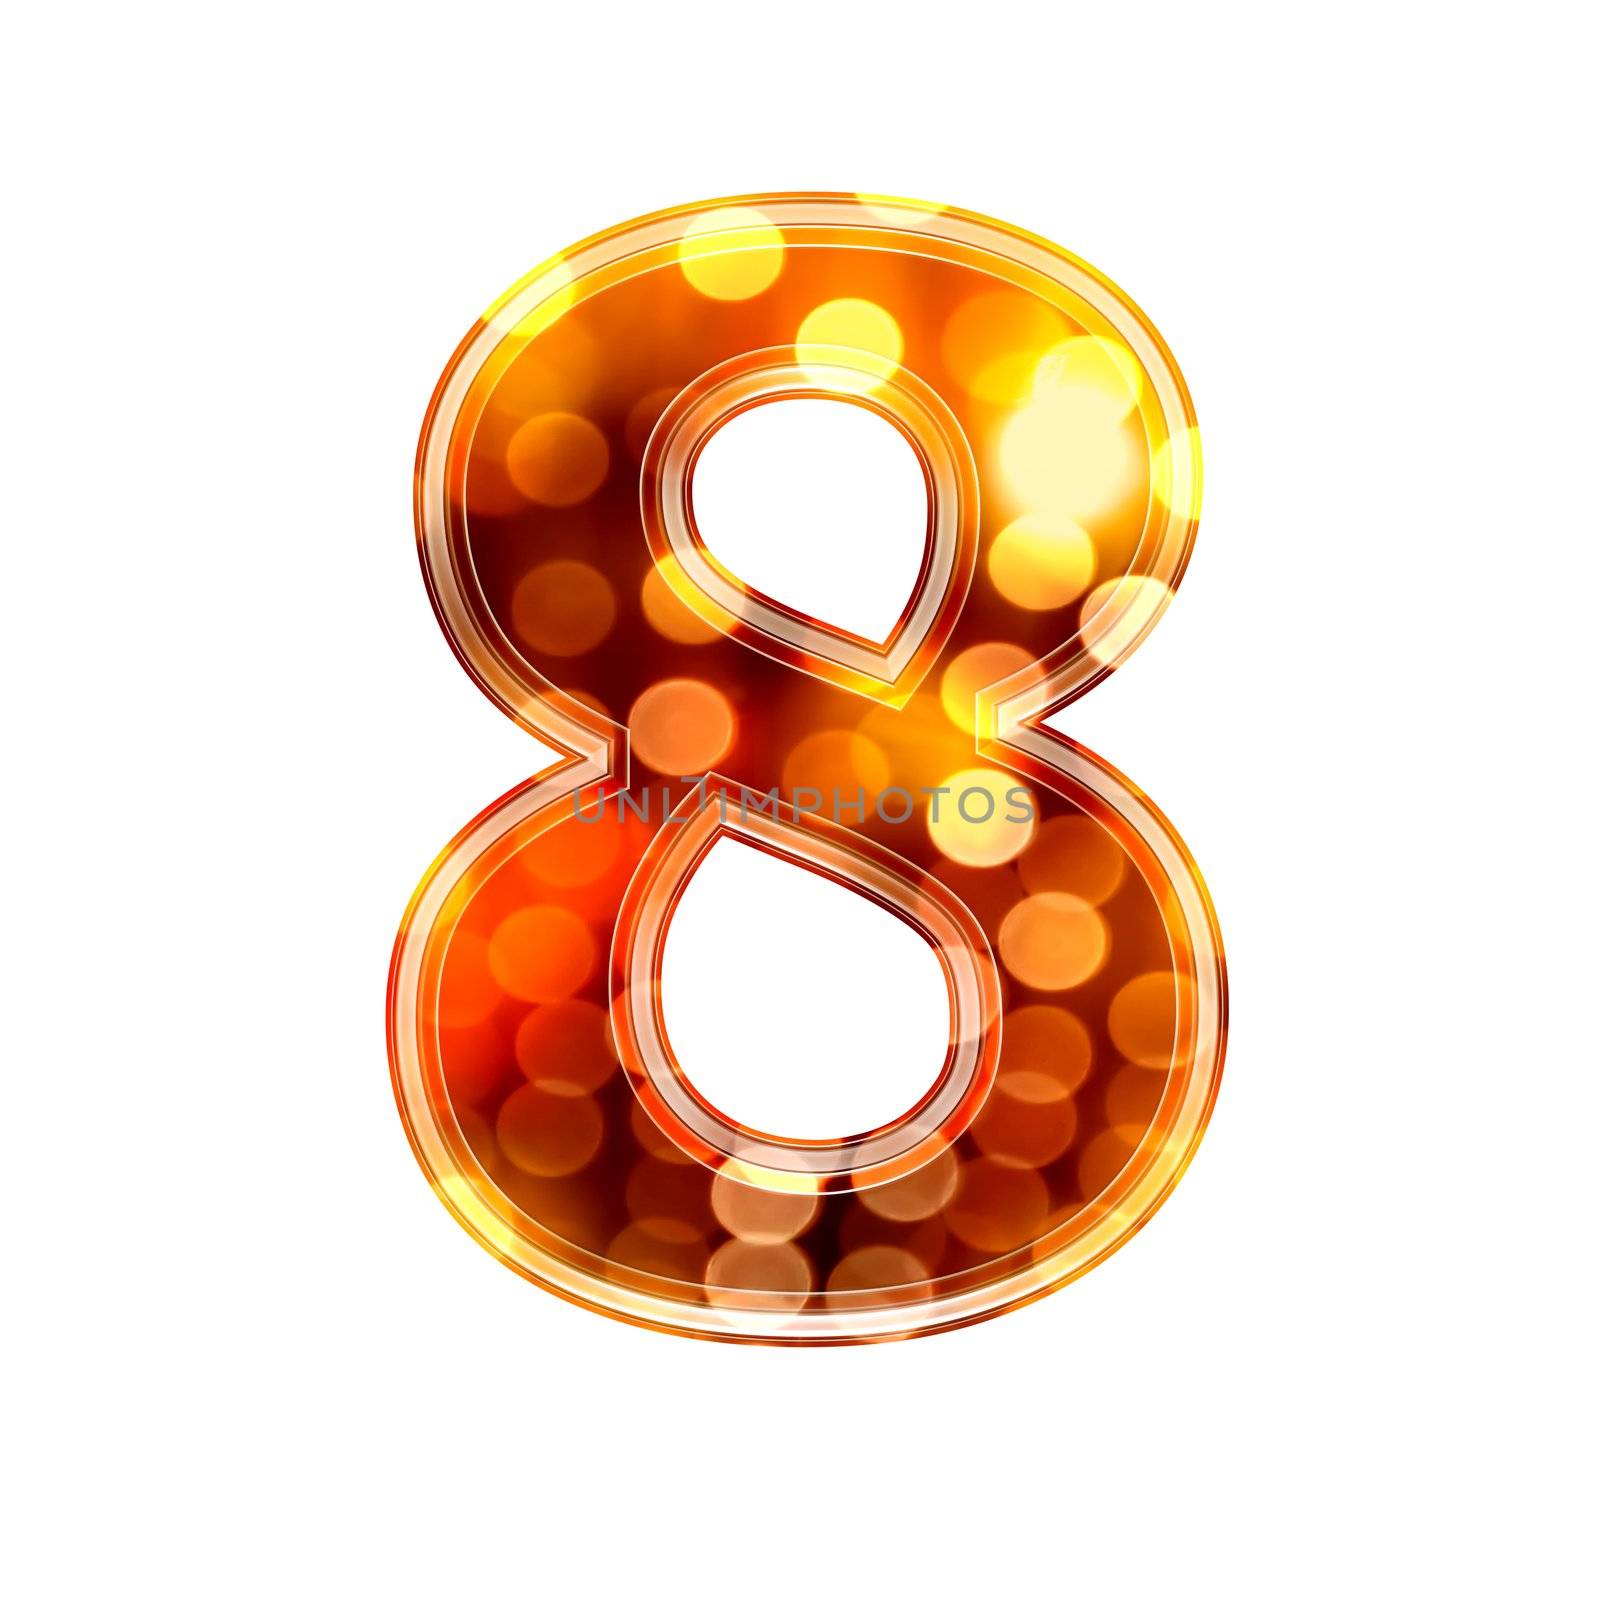 3d digit with glowing lights texture - 8